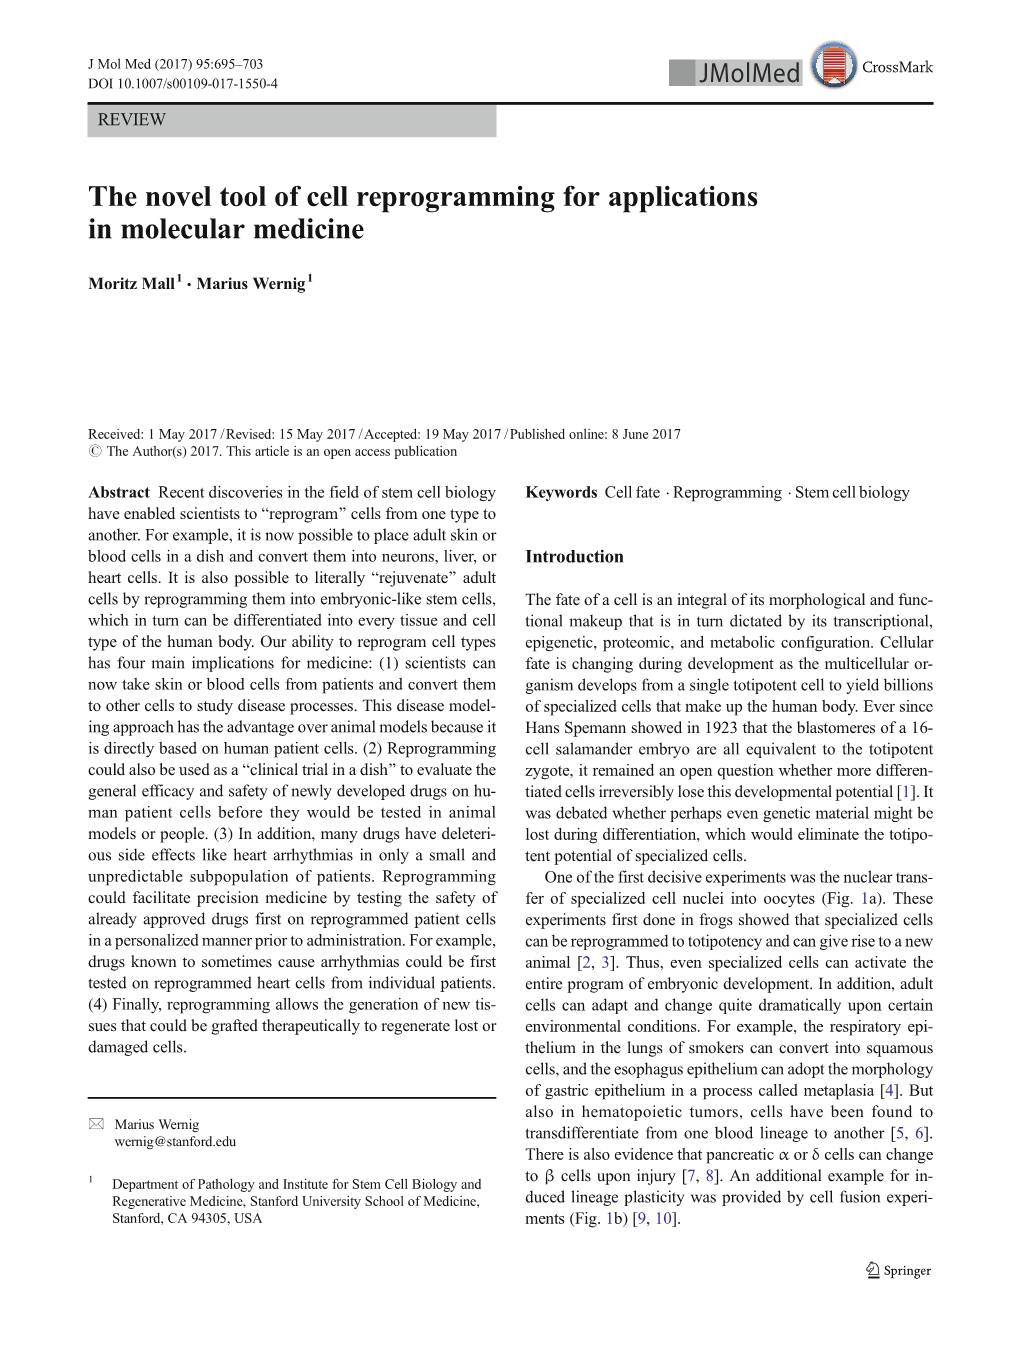 The Novel Tool of Cell Reprogramming for Applications in Molecular Medicine